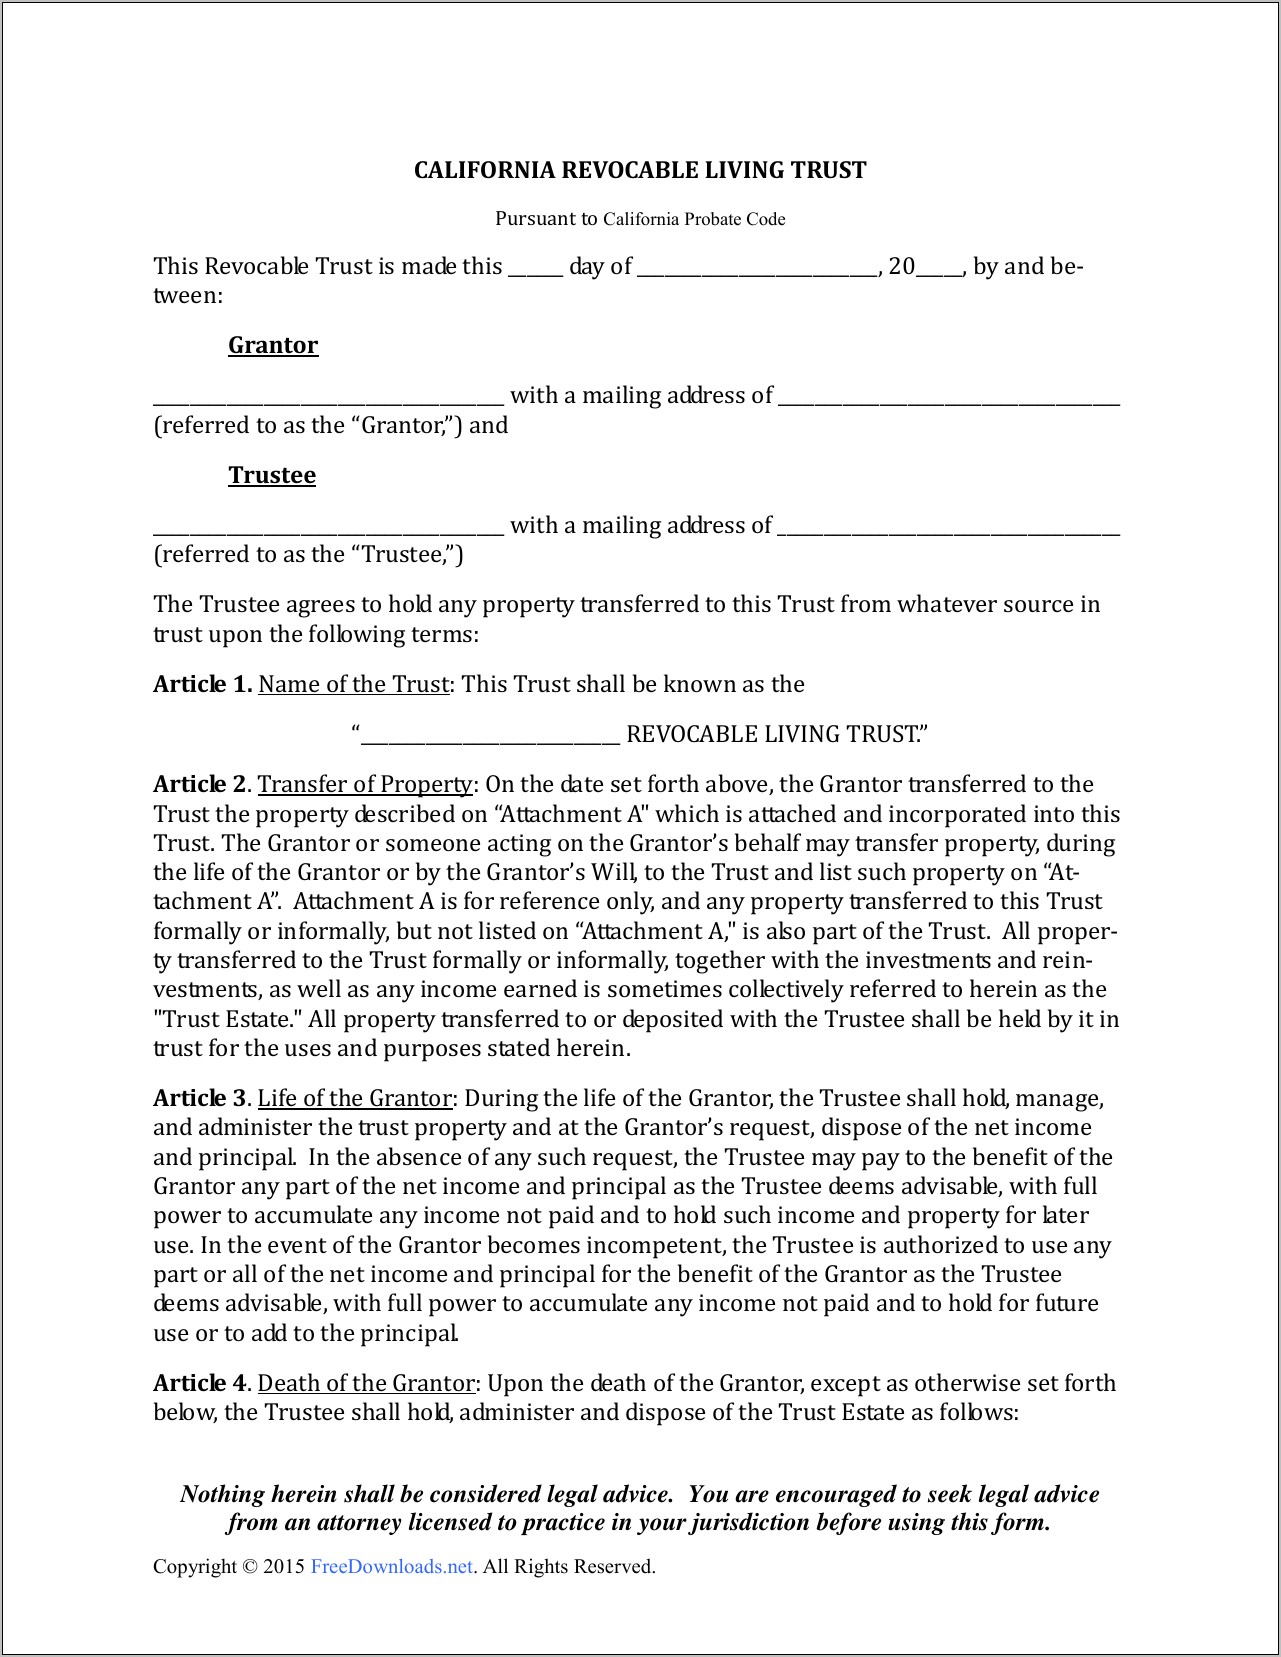 California Joint Revocable Living Trust Form